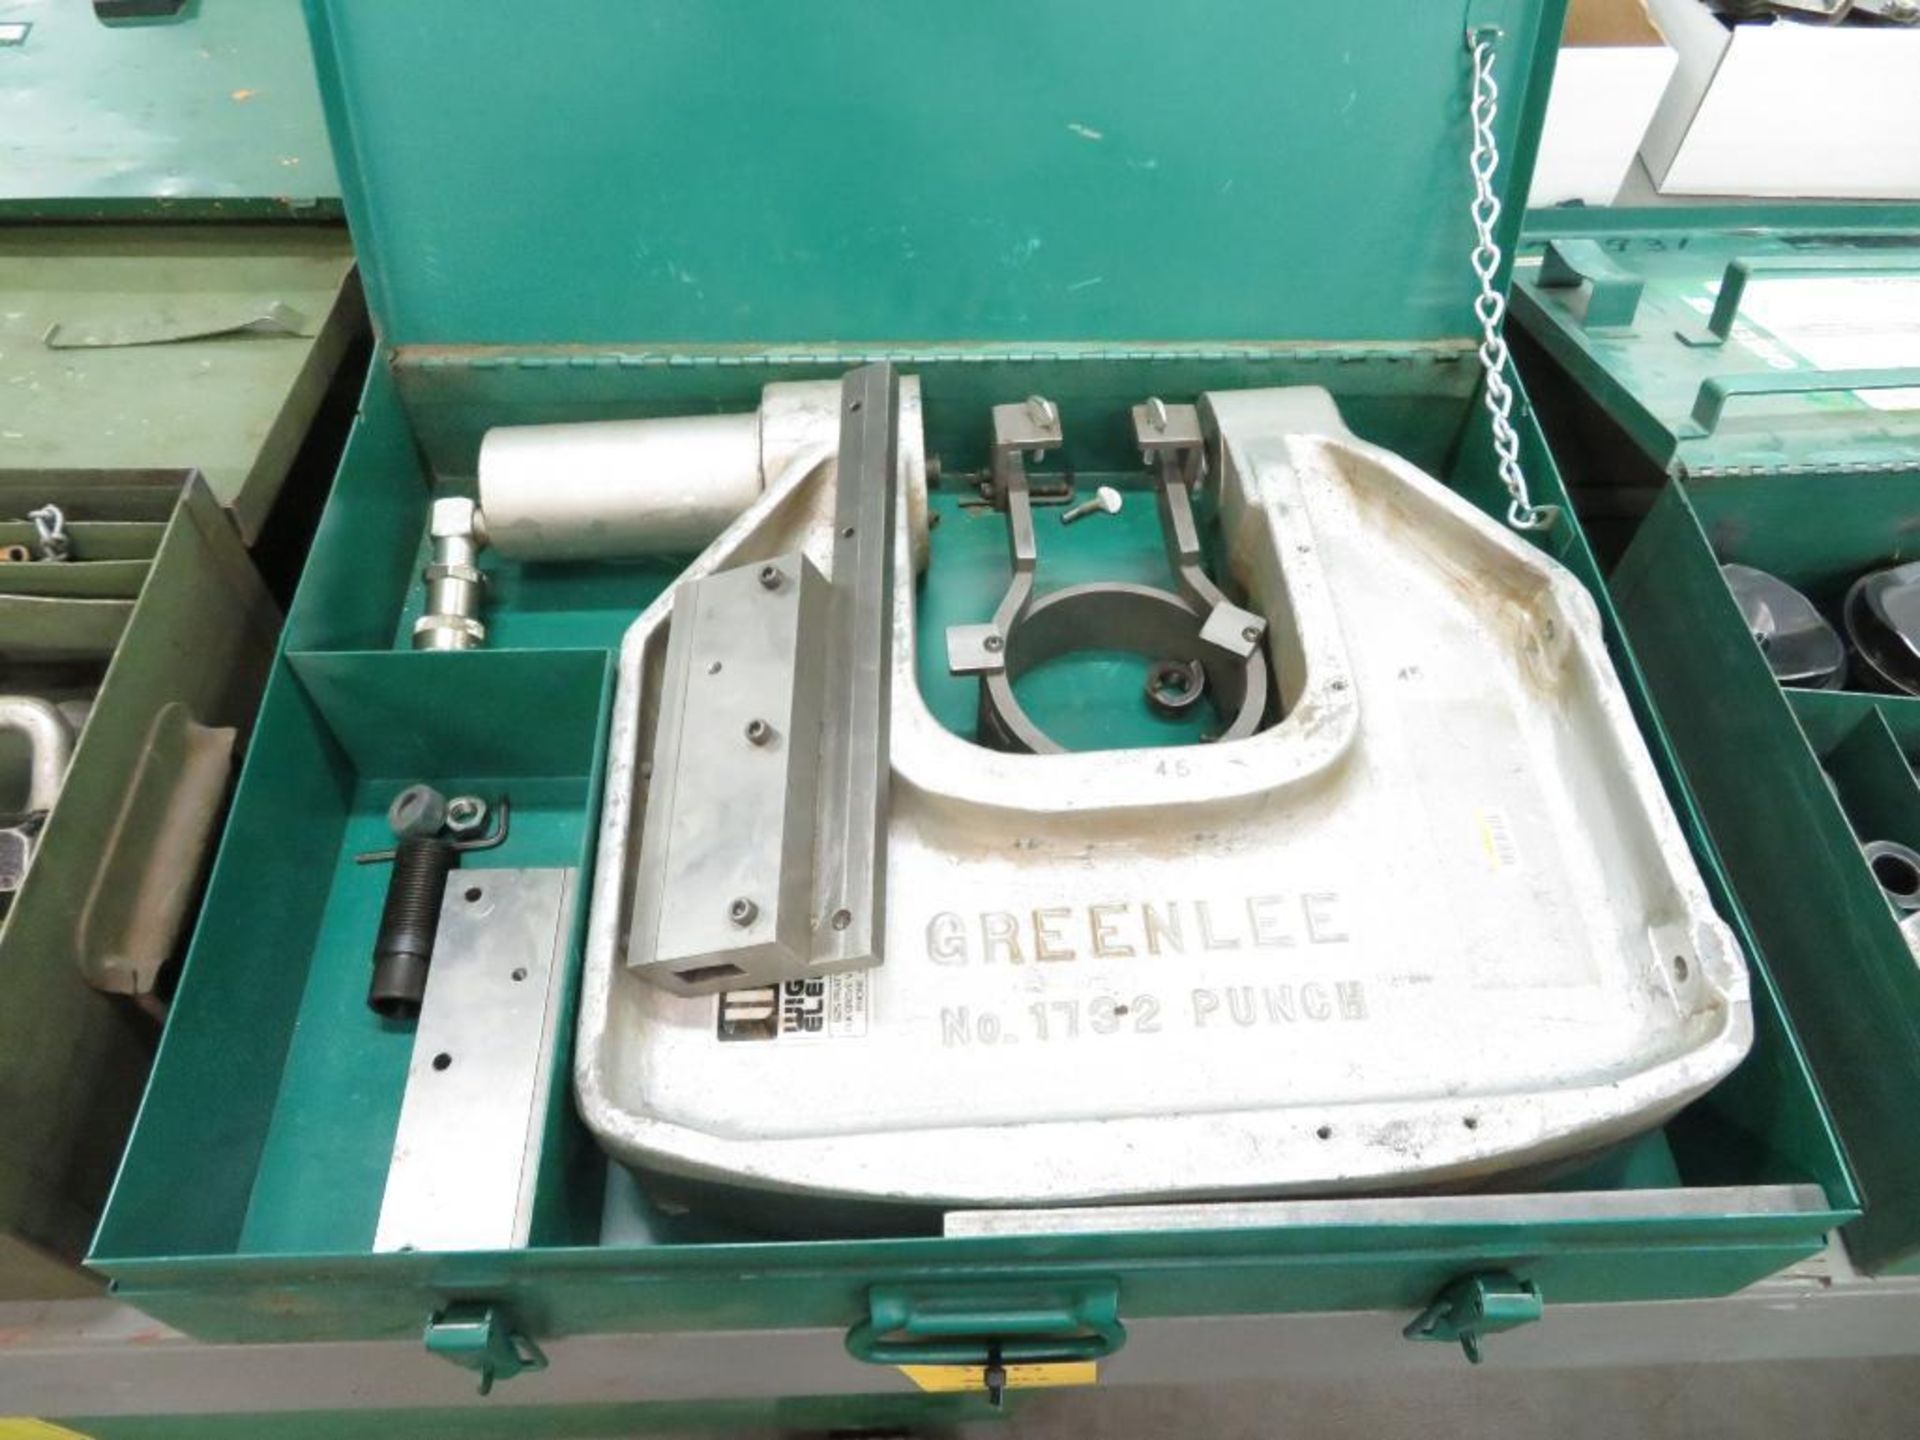 Greenlee 8 in. C-Frame Hydraulic Punch No. 1732, with Case